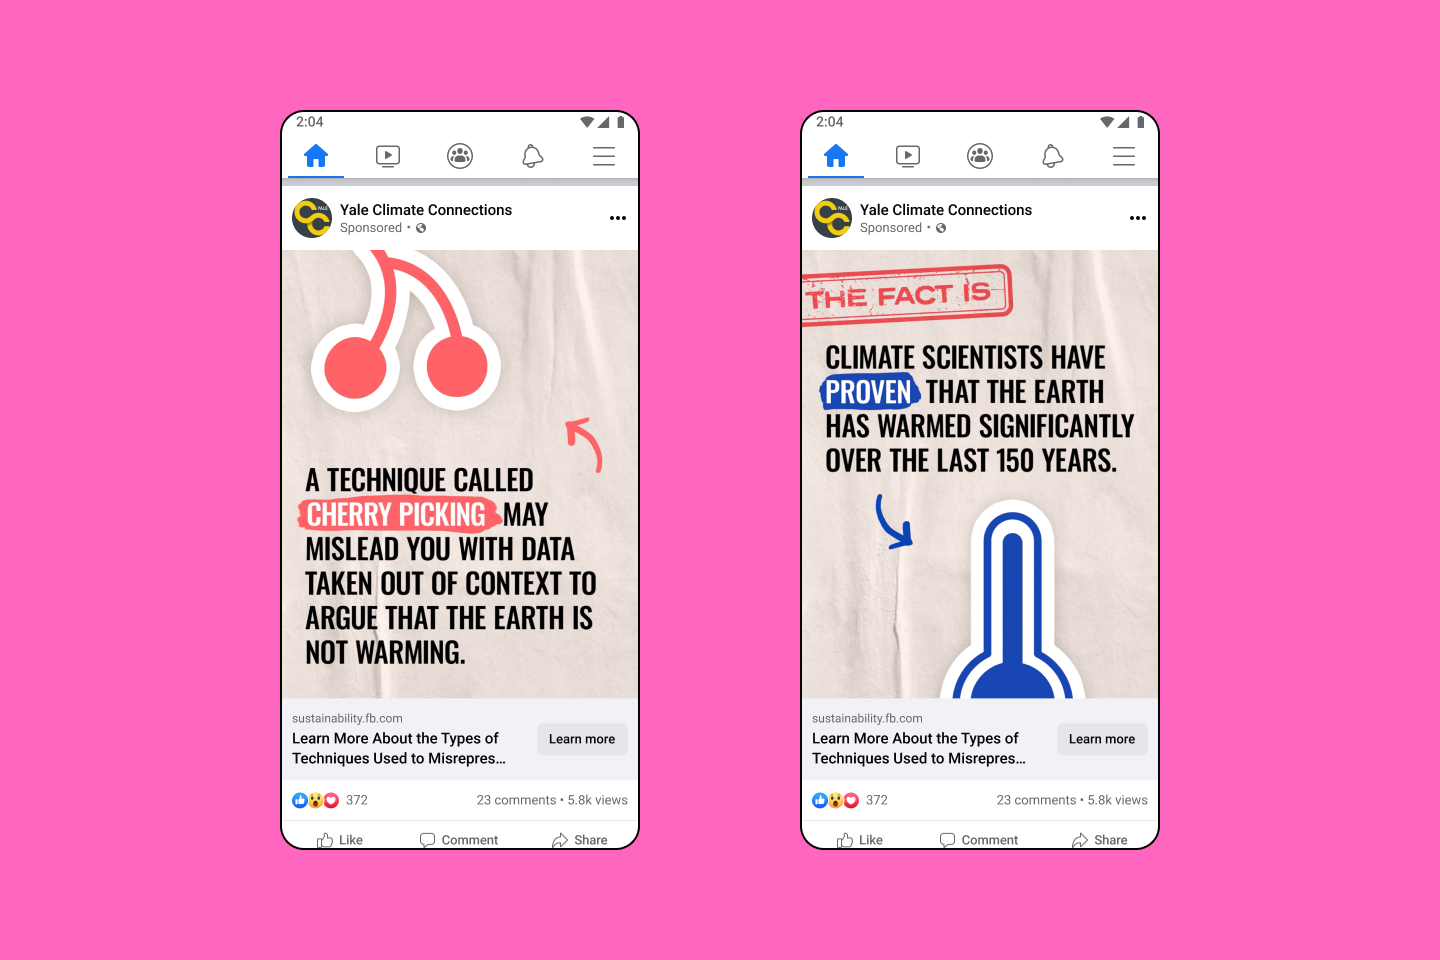 In-app UI shown on mobile device with two examples of content from Yale Climate Connections on Facebook